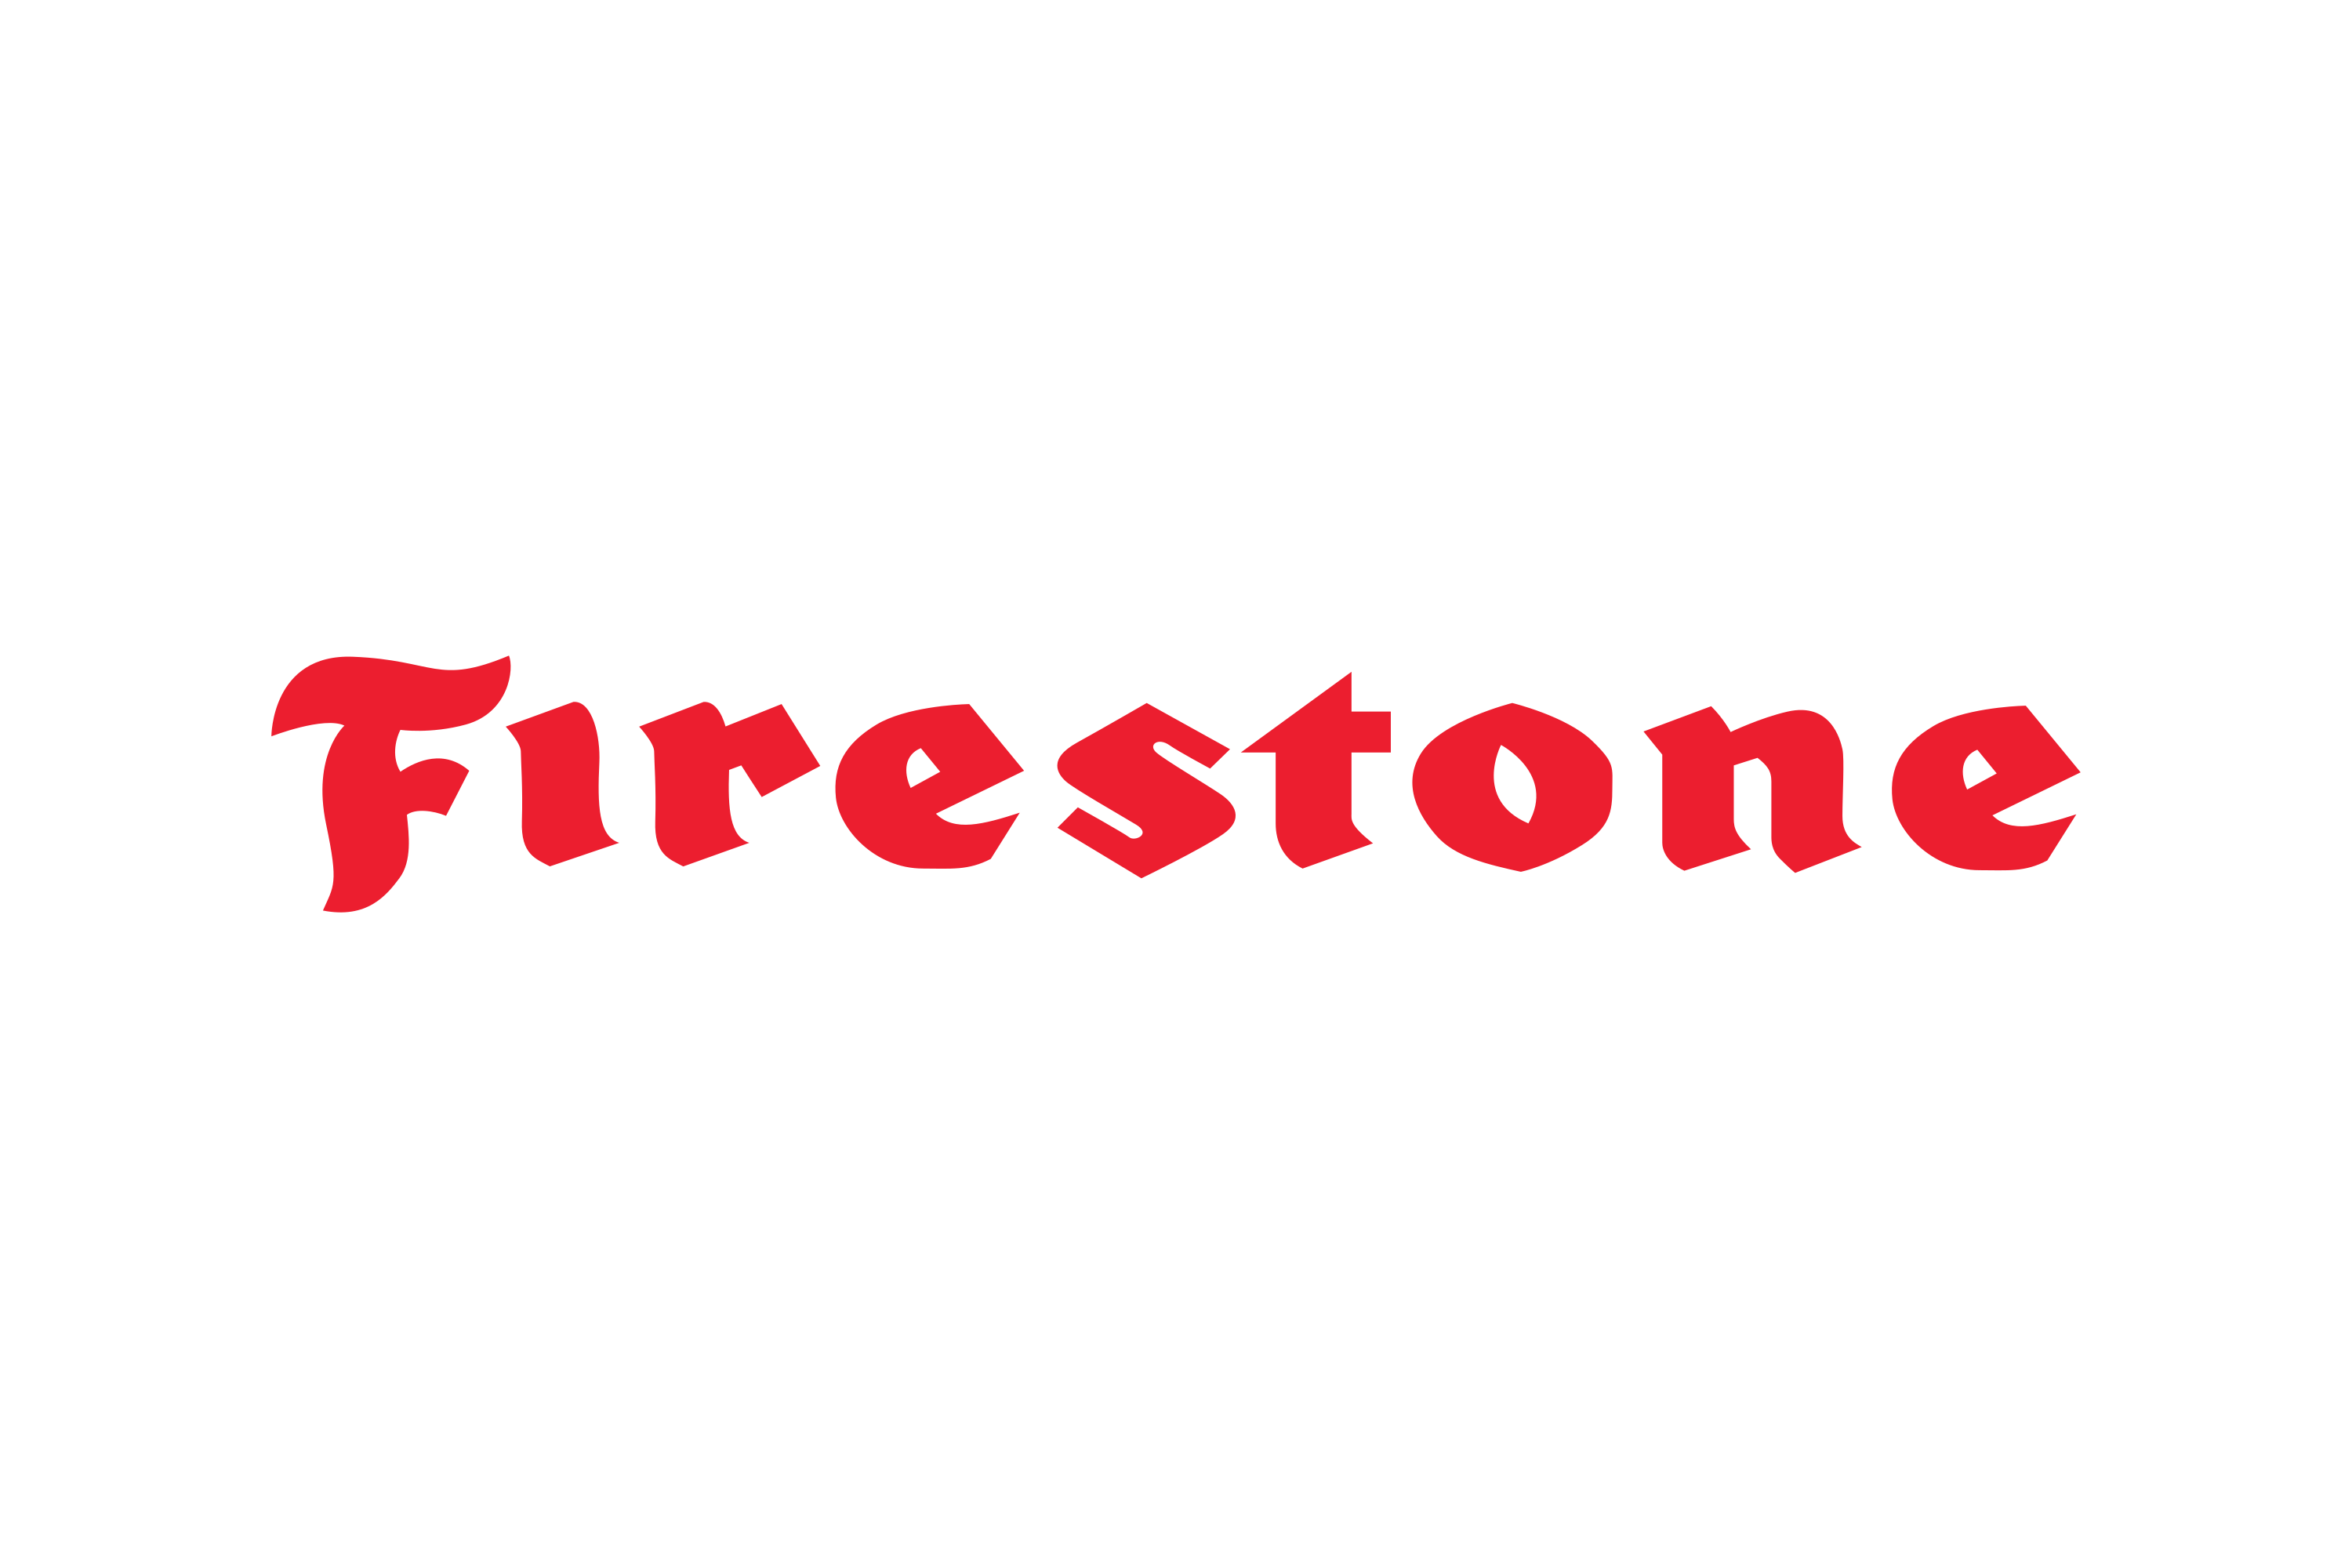 Download Firestone Tire And Rubber Company Logo In Svg Vector Or Png File Format Logo Wine